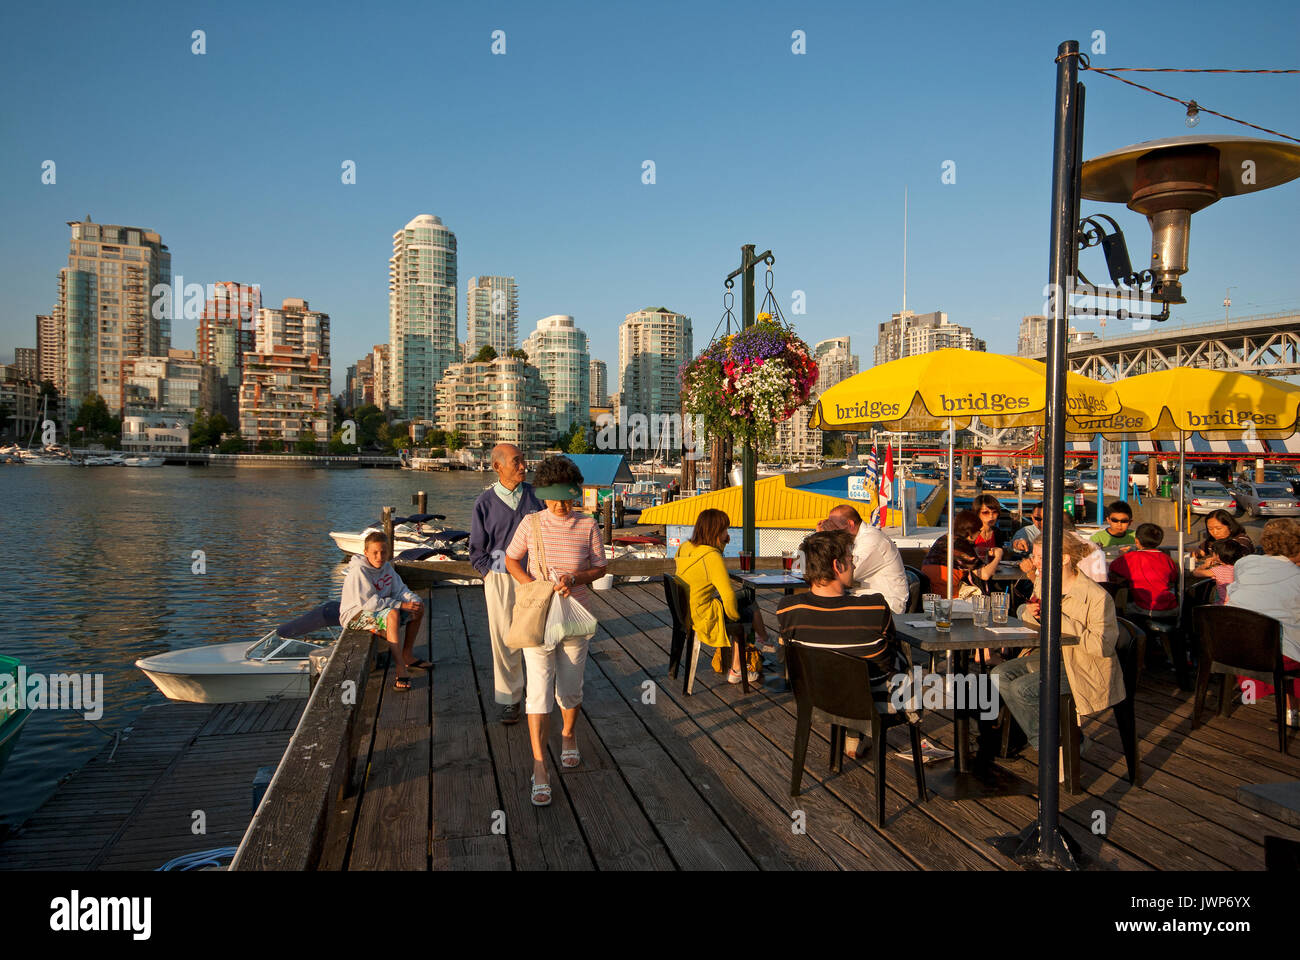 People dining on the terrace of the Bridges Restaurant, Granville Island, skyscrapers in the background, Vancouver, Canada Stock Photo